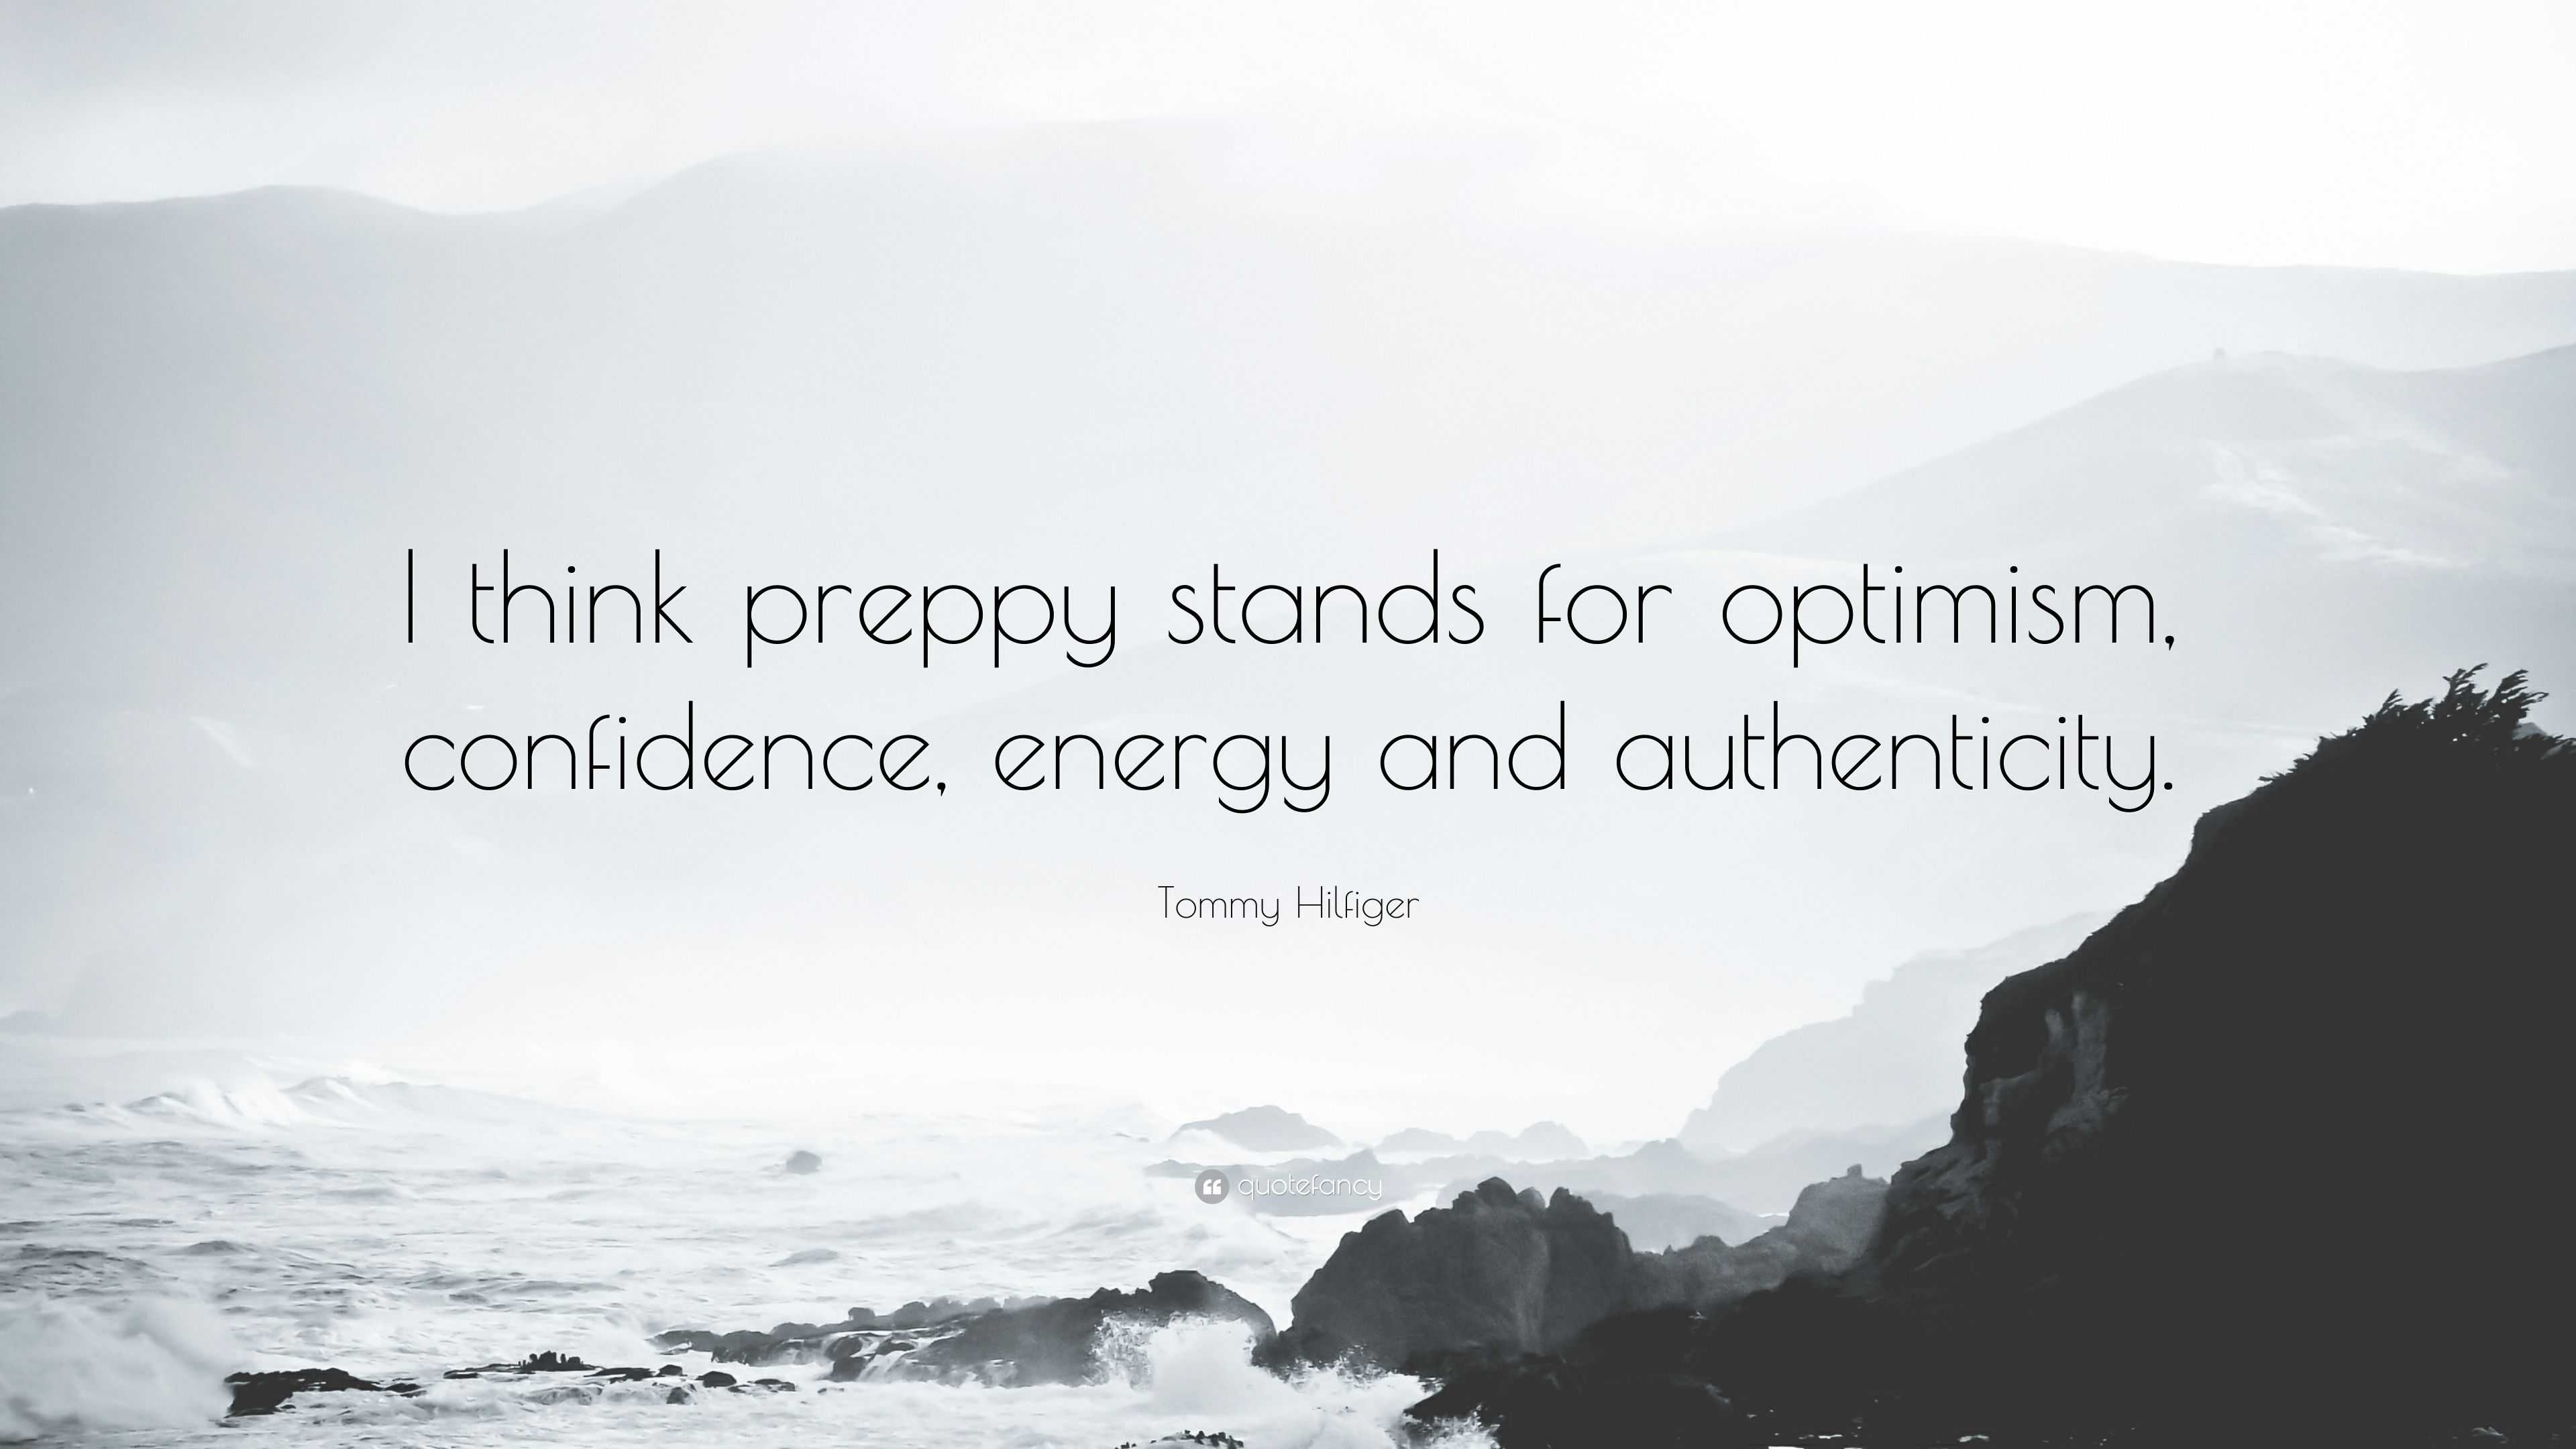 https://quotefancy.com/media/wallpaper/3840x2160/4359706-Tommy-Hilfiger-Quote-I-think-preppy-stands-for-optimism-confidence.jpg